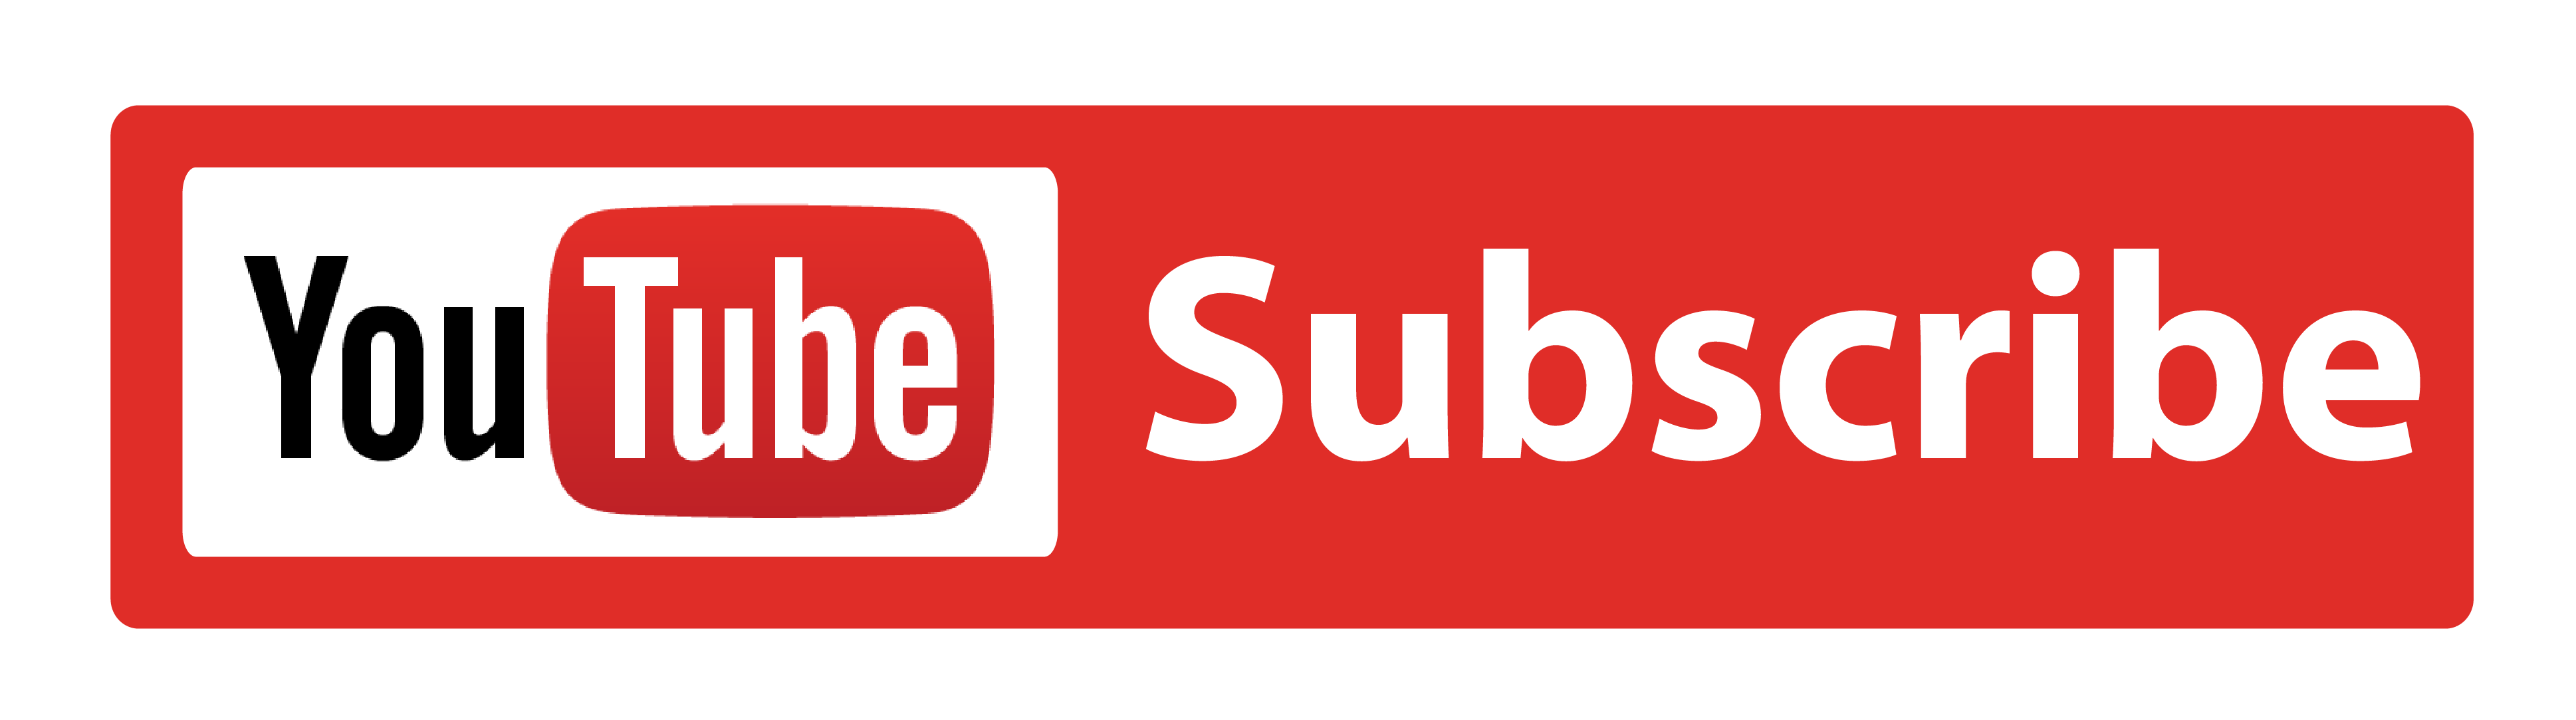 youtube subscribe png logos #27850